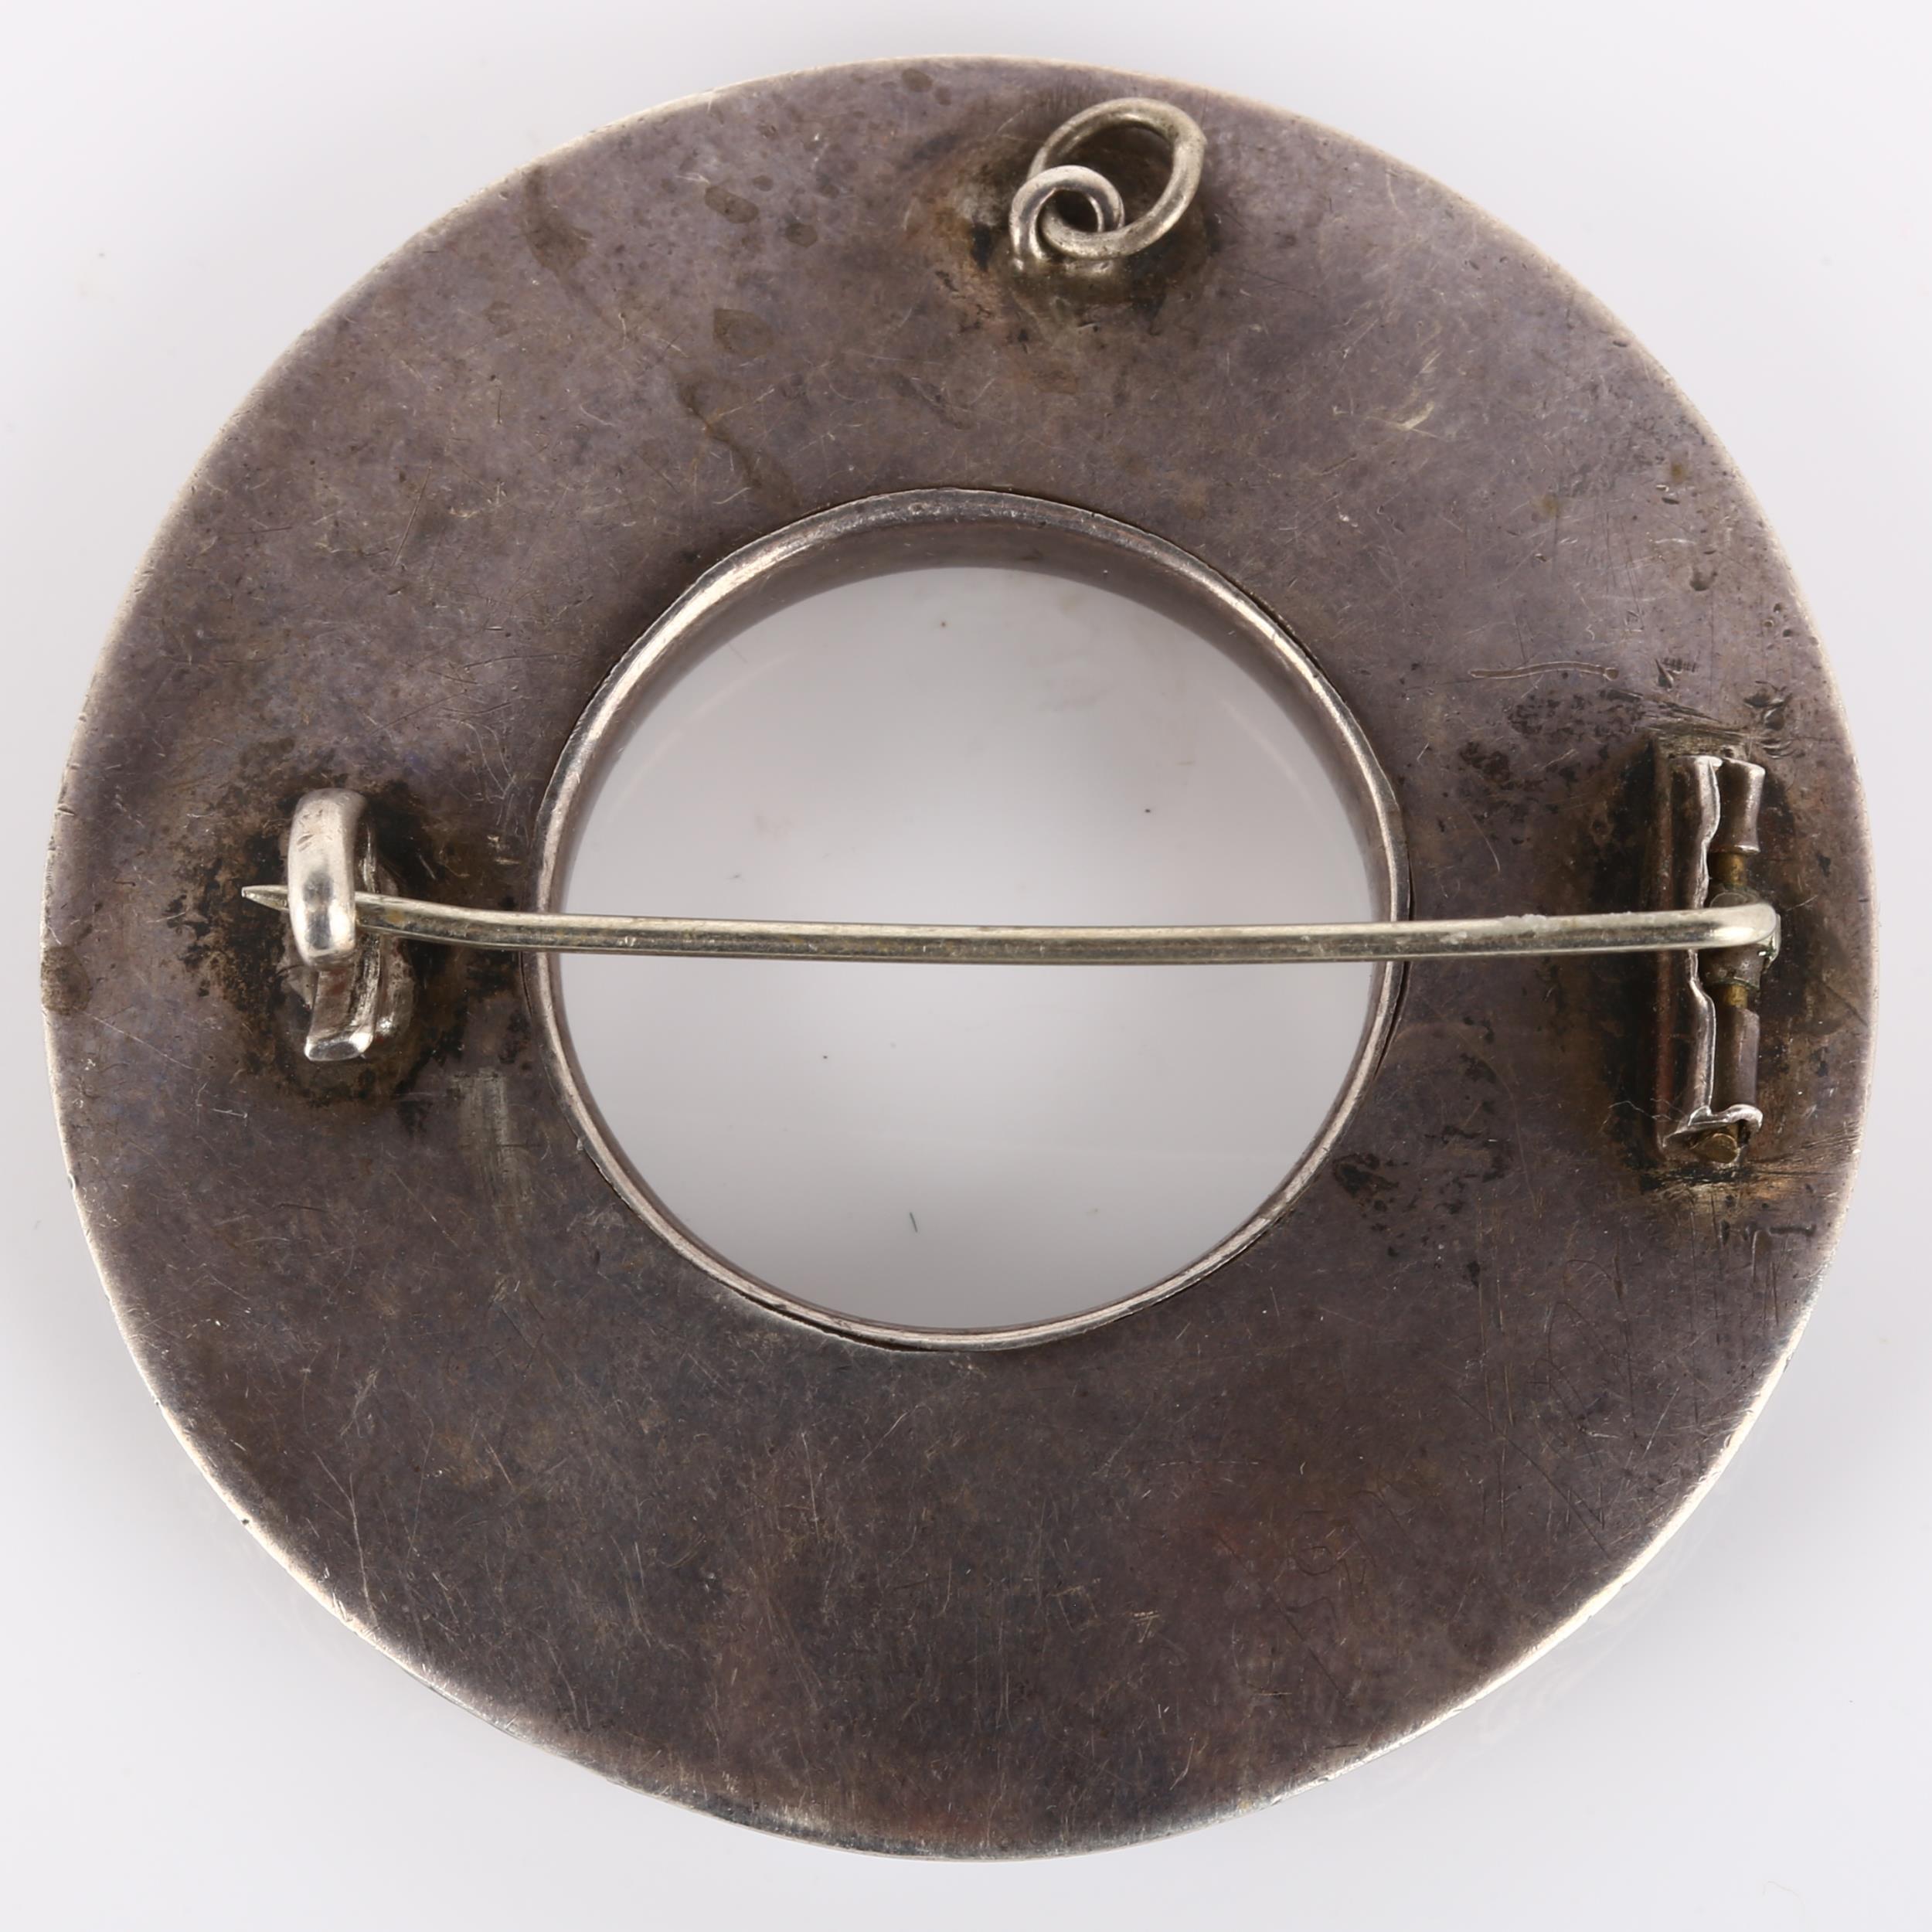 A 19th century Scottish hardstone brooch, unmarked silver closed-back settings in circular form, - Image 3 of 4